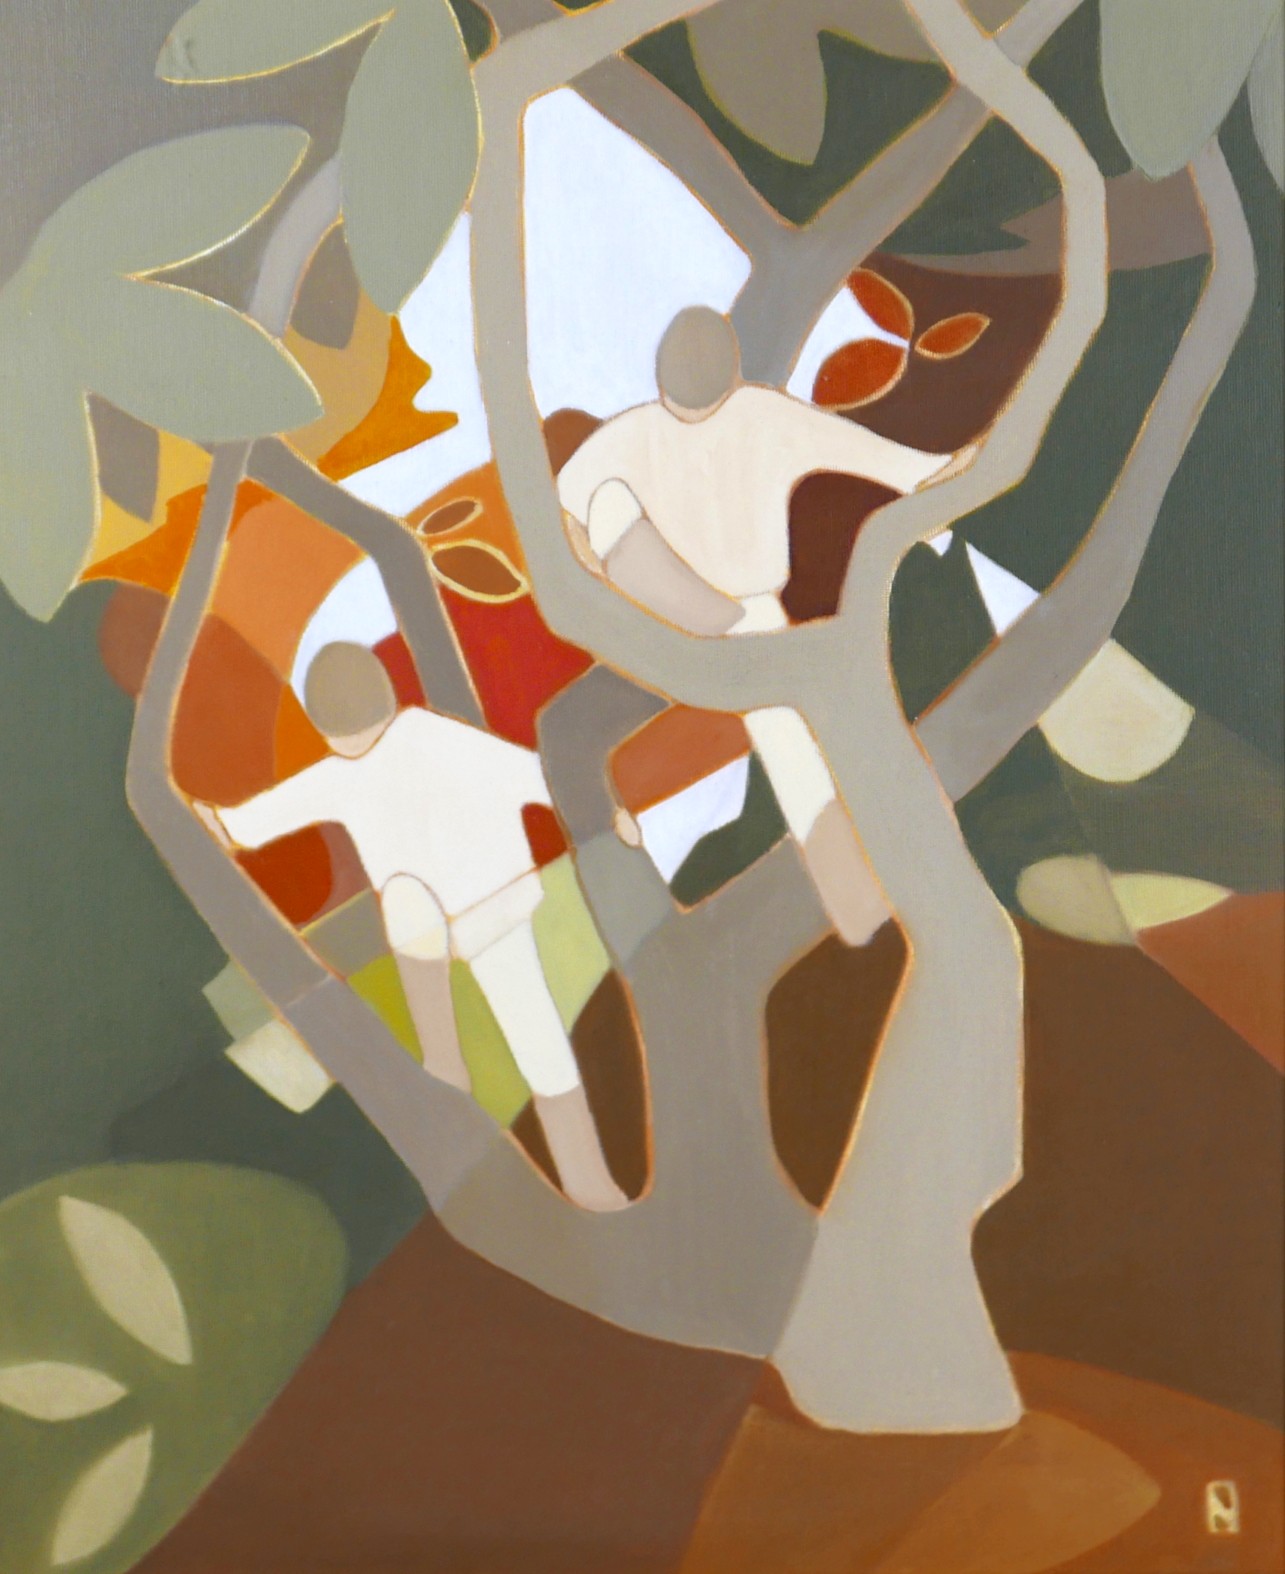 Barbara Neville Shaw (British, 20th century): 'The Climbing-Tree', an abstract depicting two figures